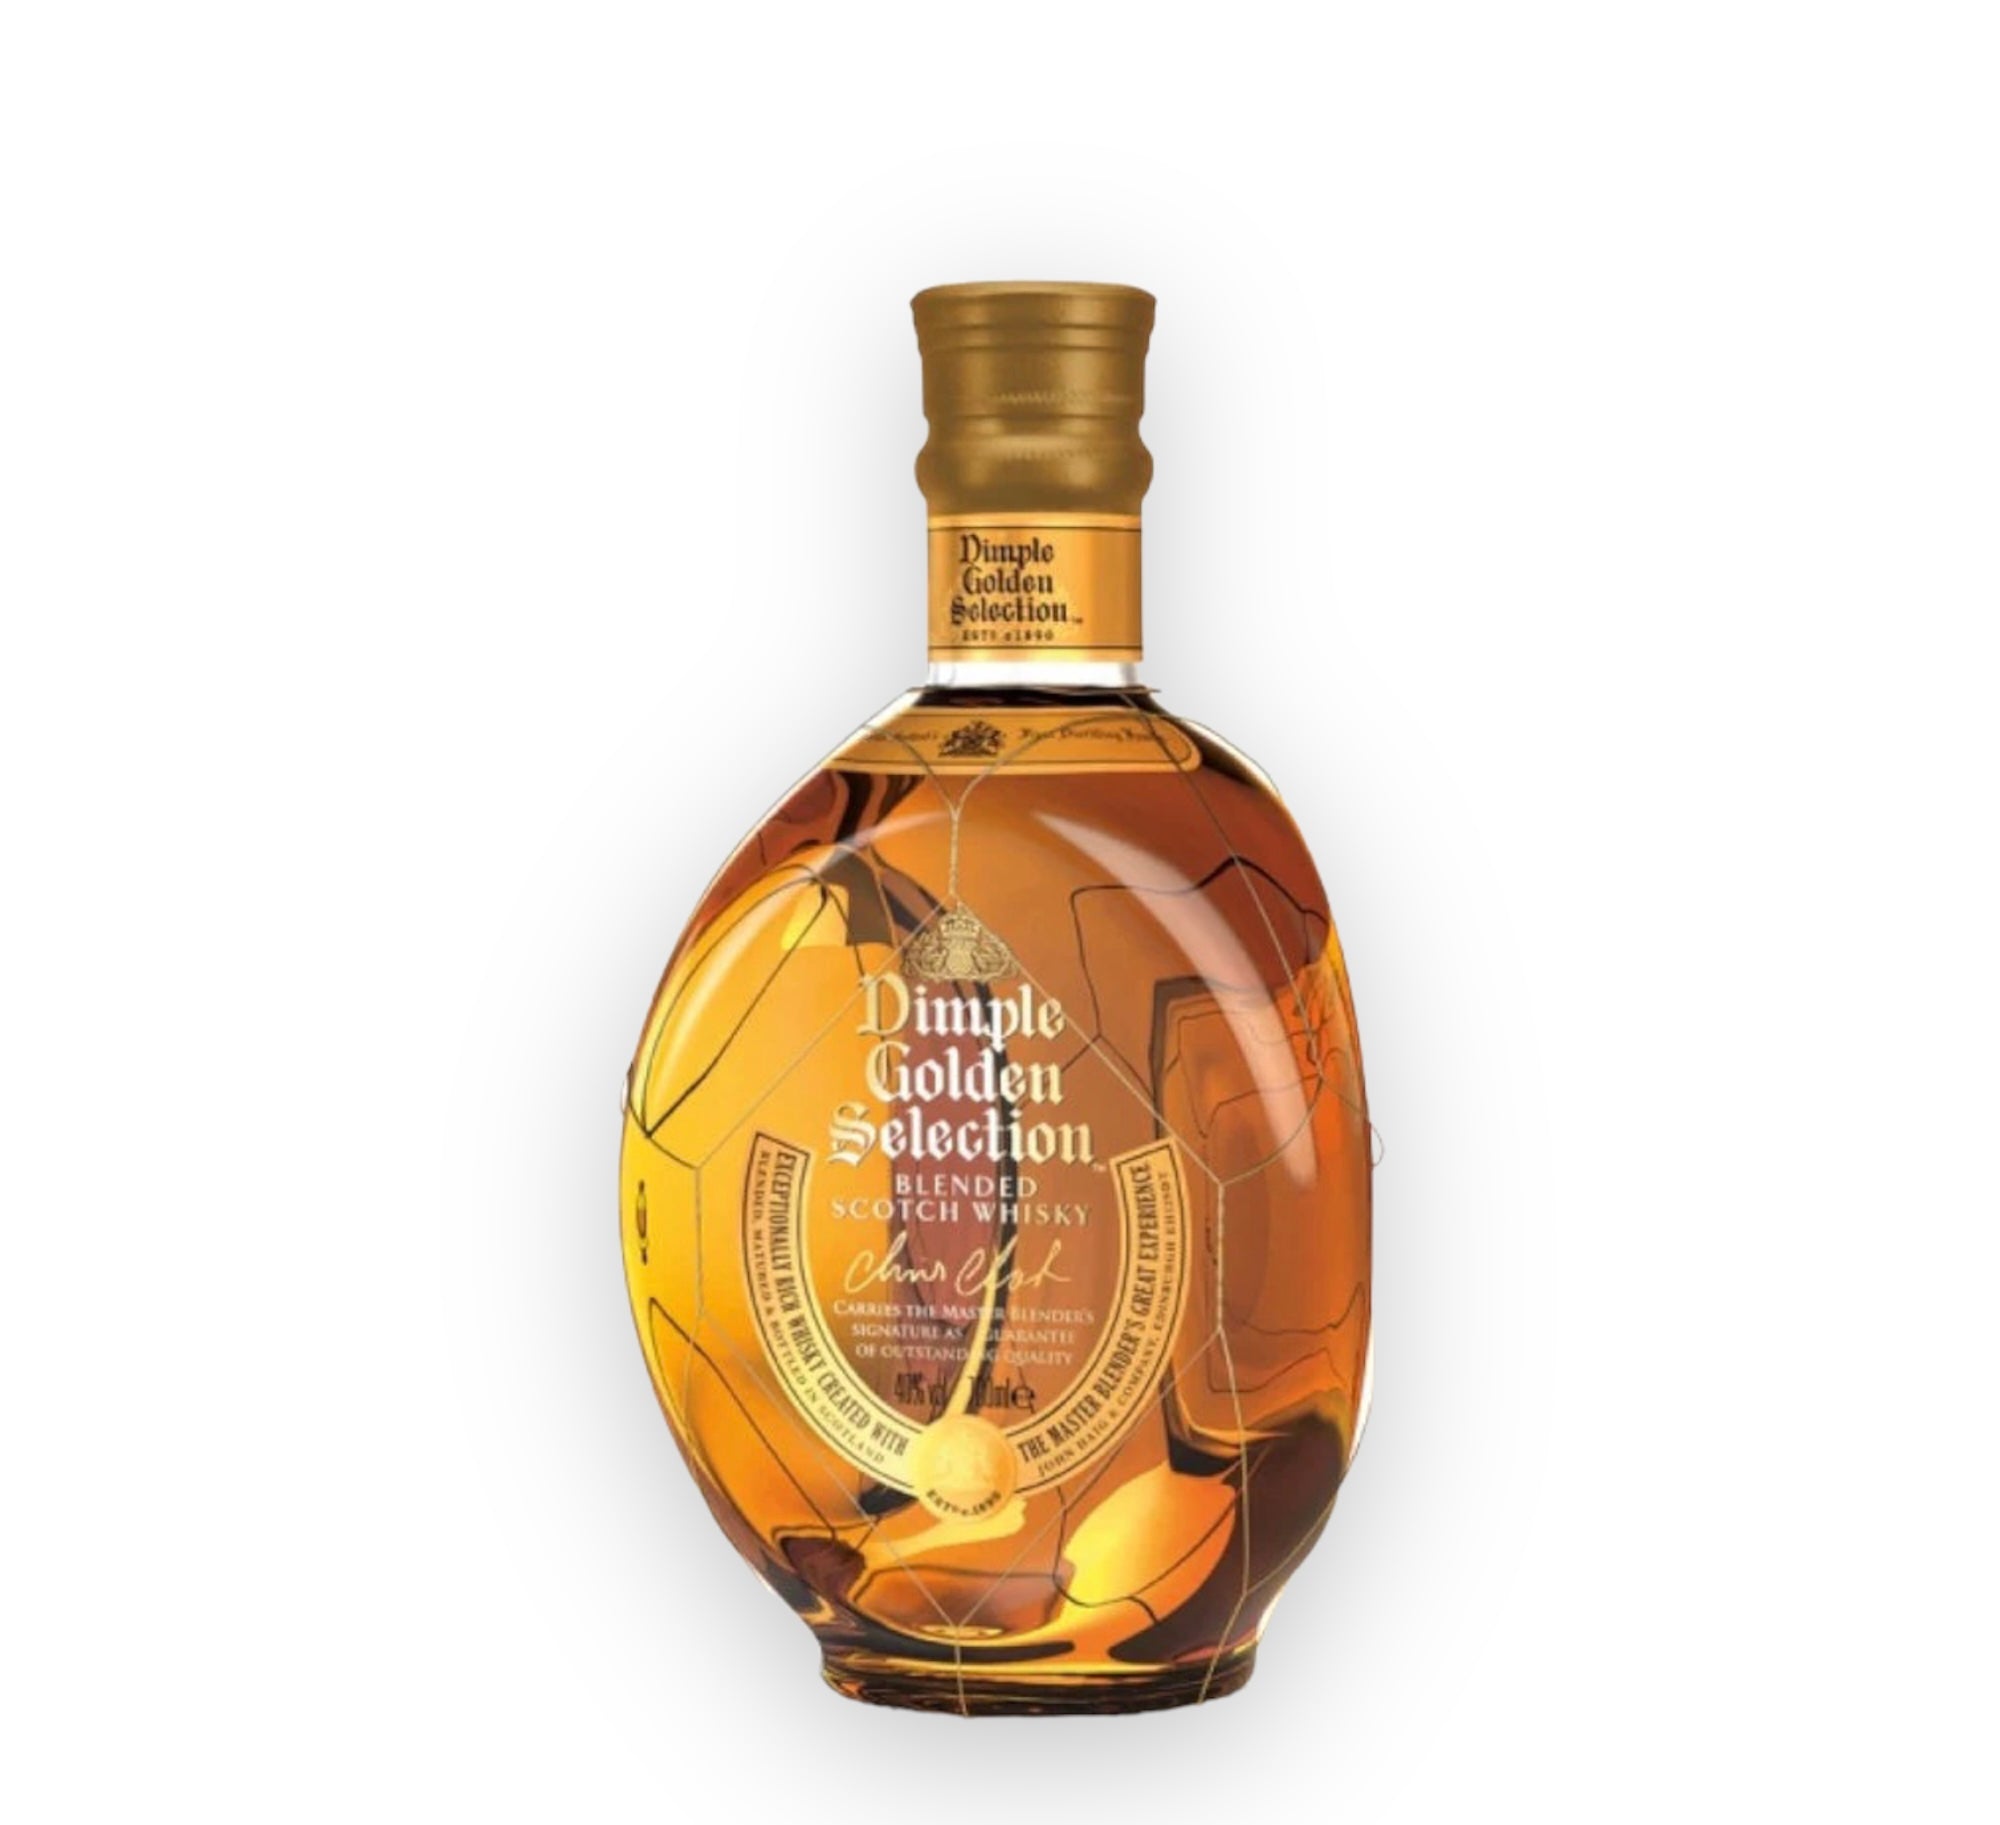 Dimple Golden Selection Blended Scotch Whiskey 0.7l